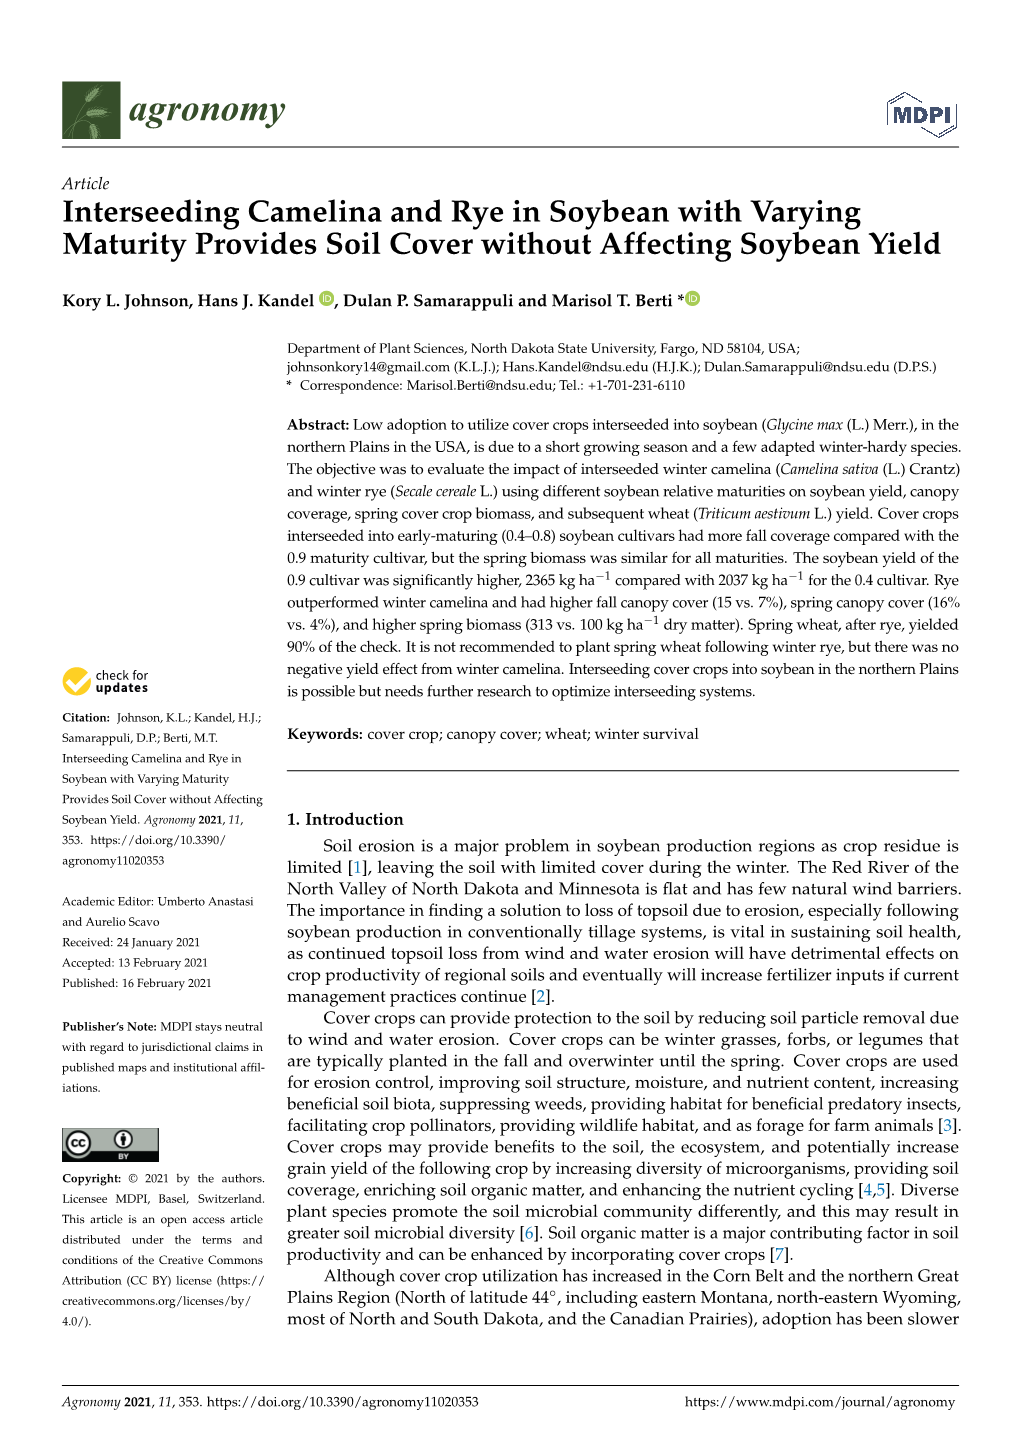 Interseeding Camelina and Rye in Soybean with Varying Maturity Provides Soil Cover Without Affecting Soybean Yield